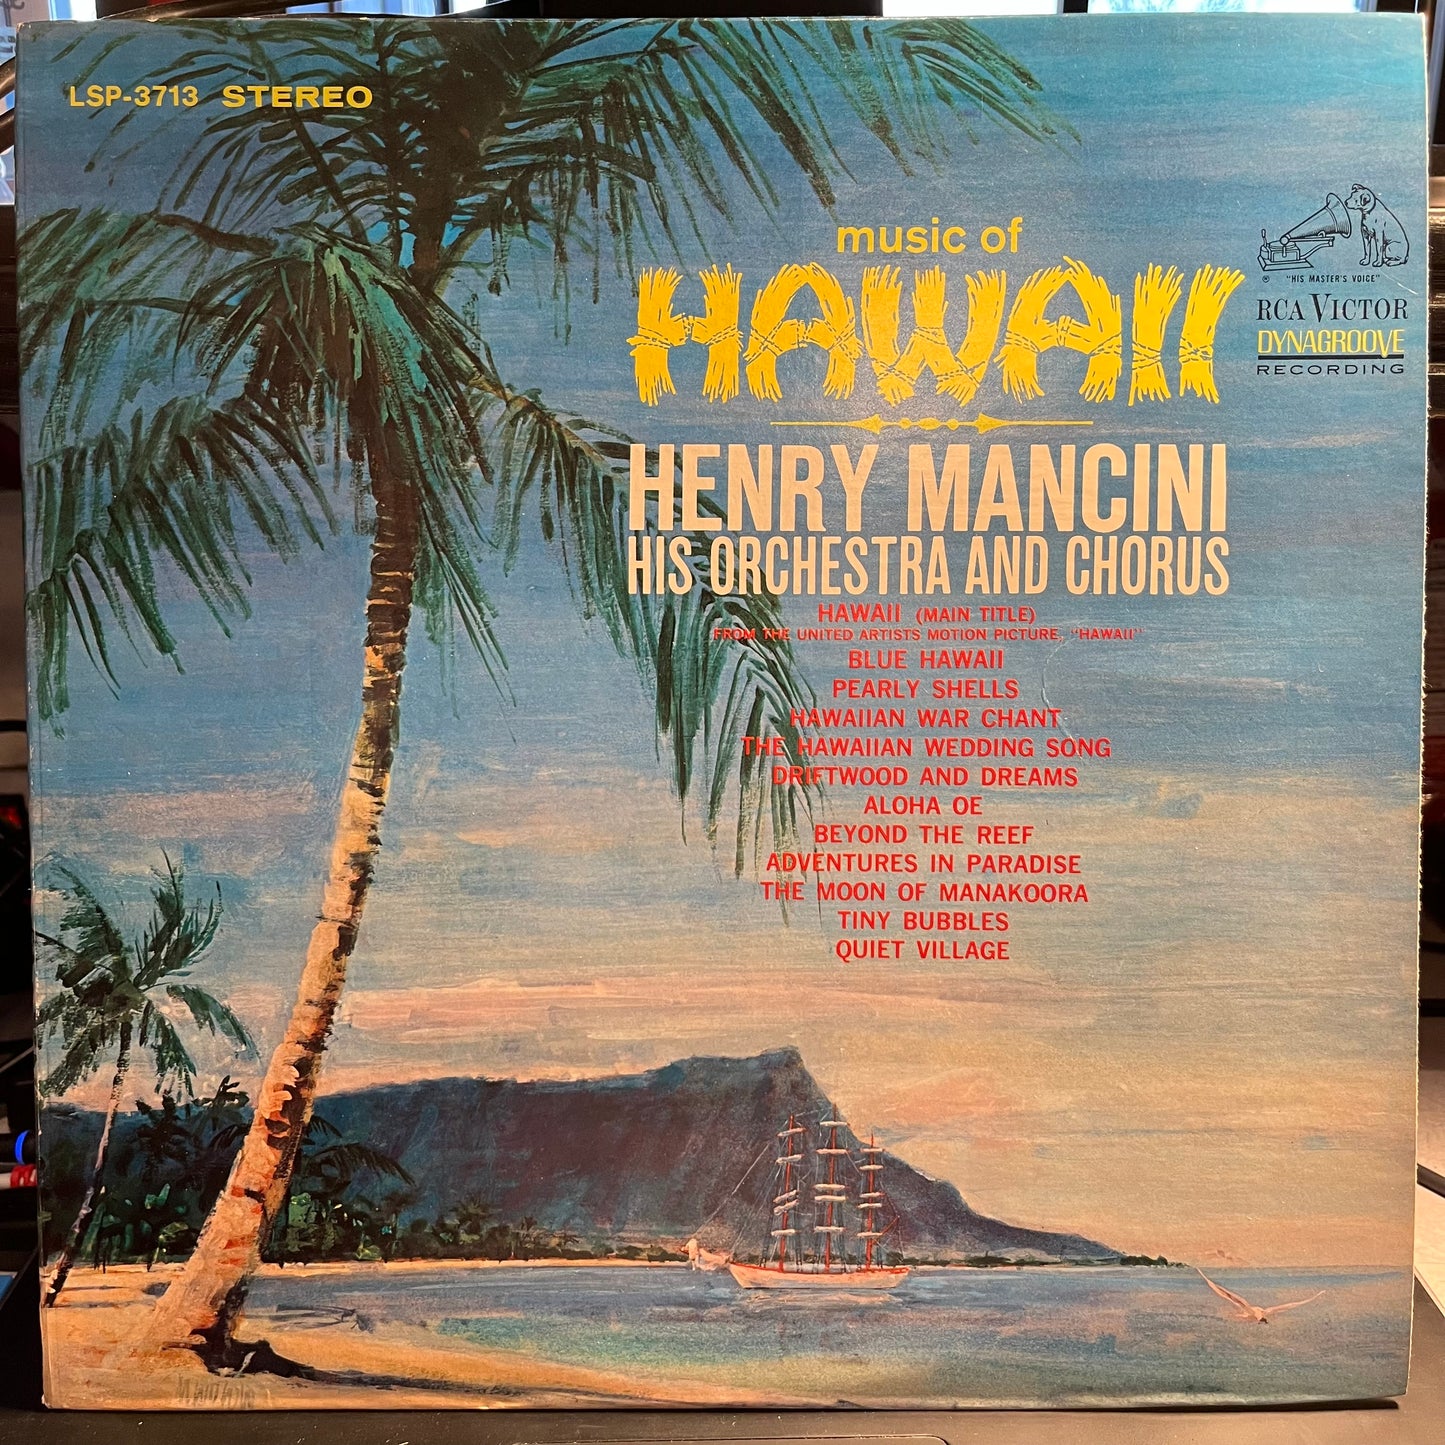 Henry Mancini And His Orchestra And Chorus Music Of Hawaii *REISSUE* LP Near Mint (NM or M-) Near Mint (NM or M-)